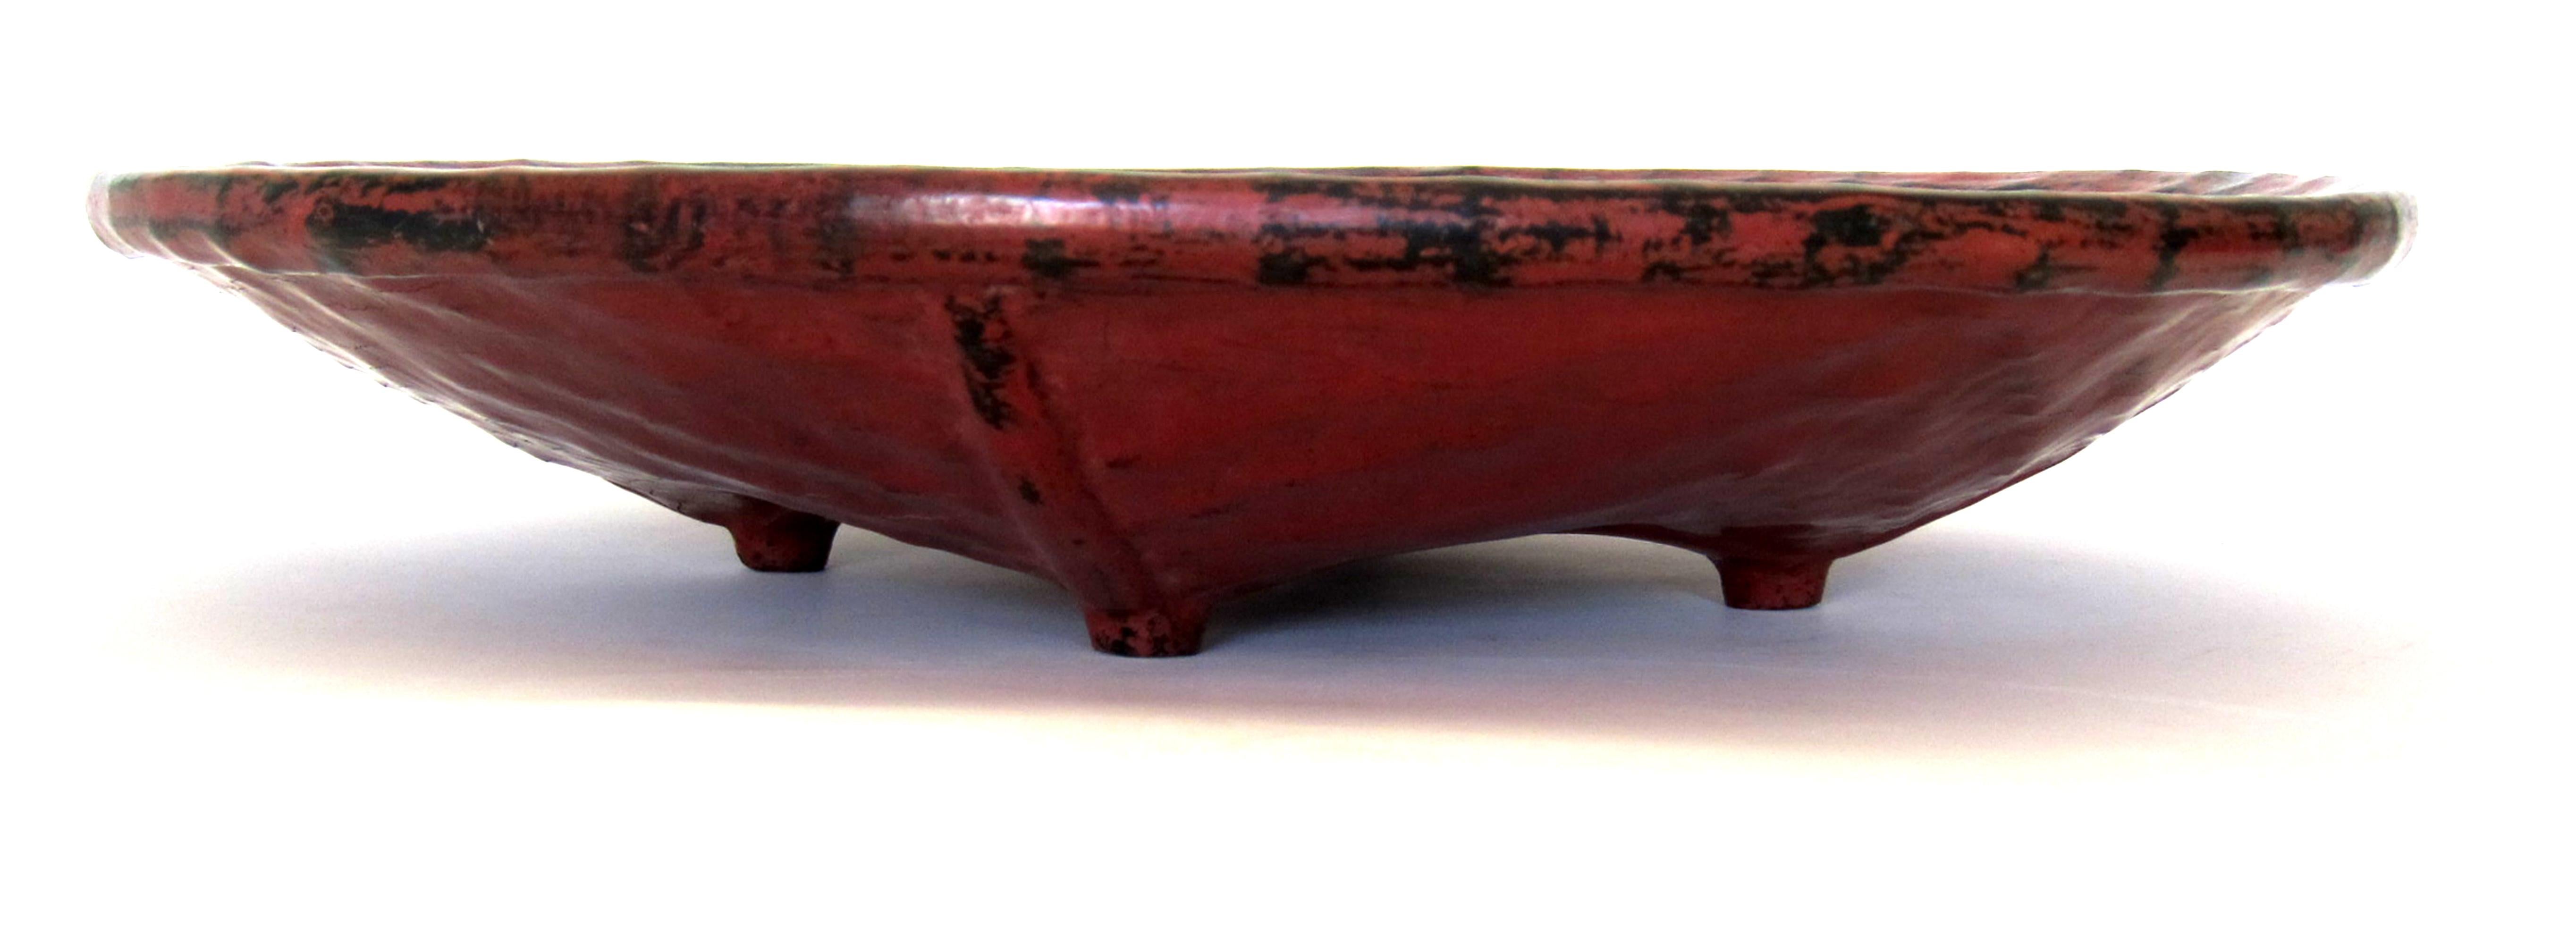 Hand-Crafted Early 20th Century Burmese Lacquered Tray, “Pagan Bya” For Sale